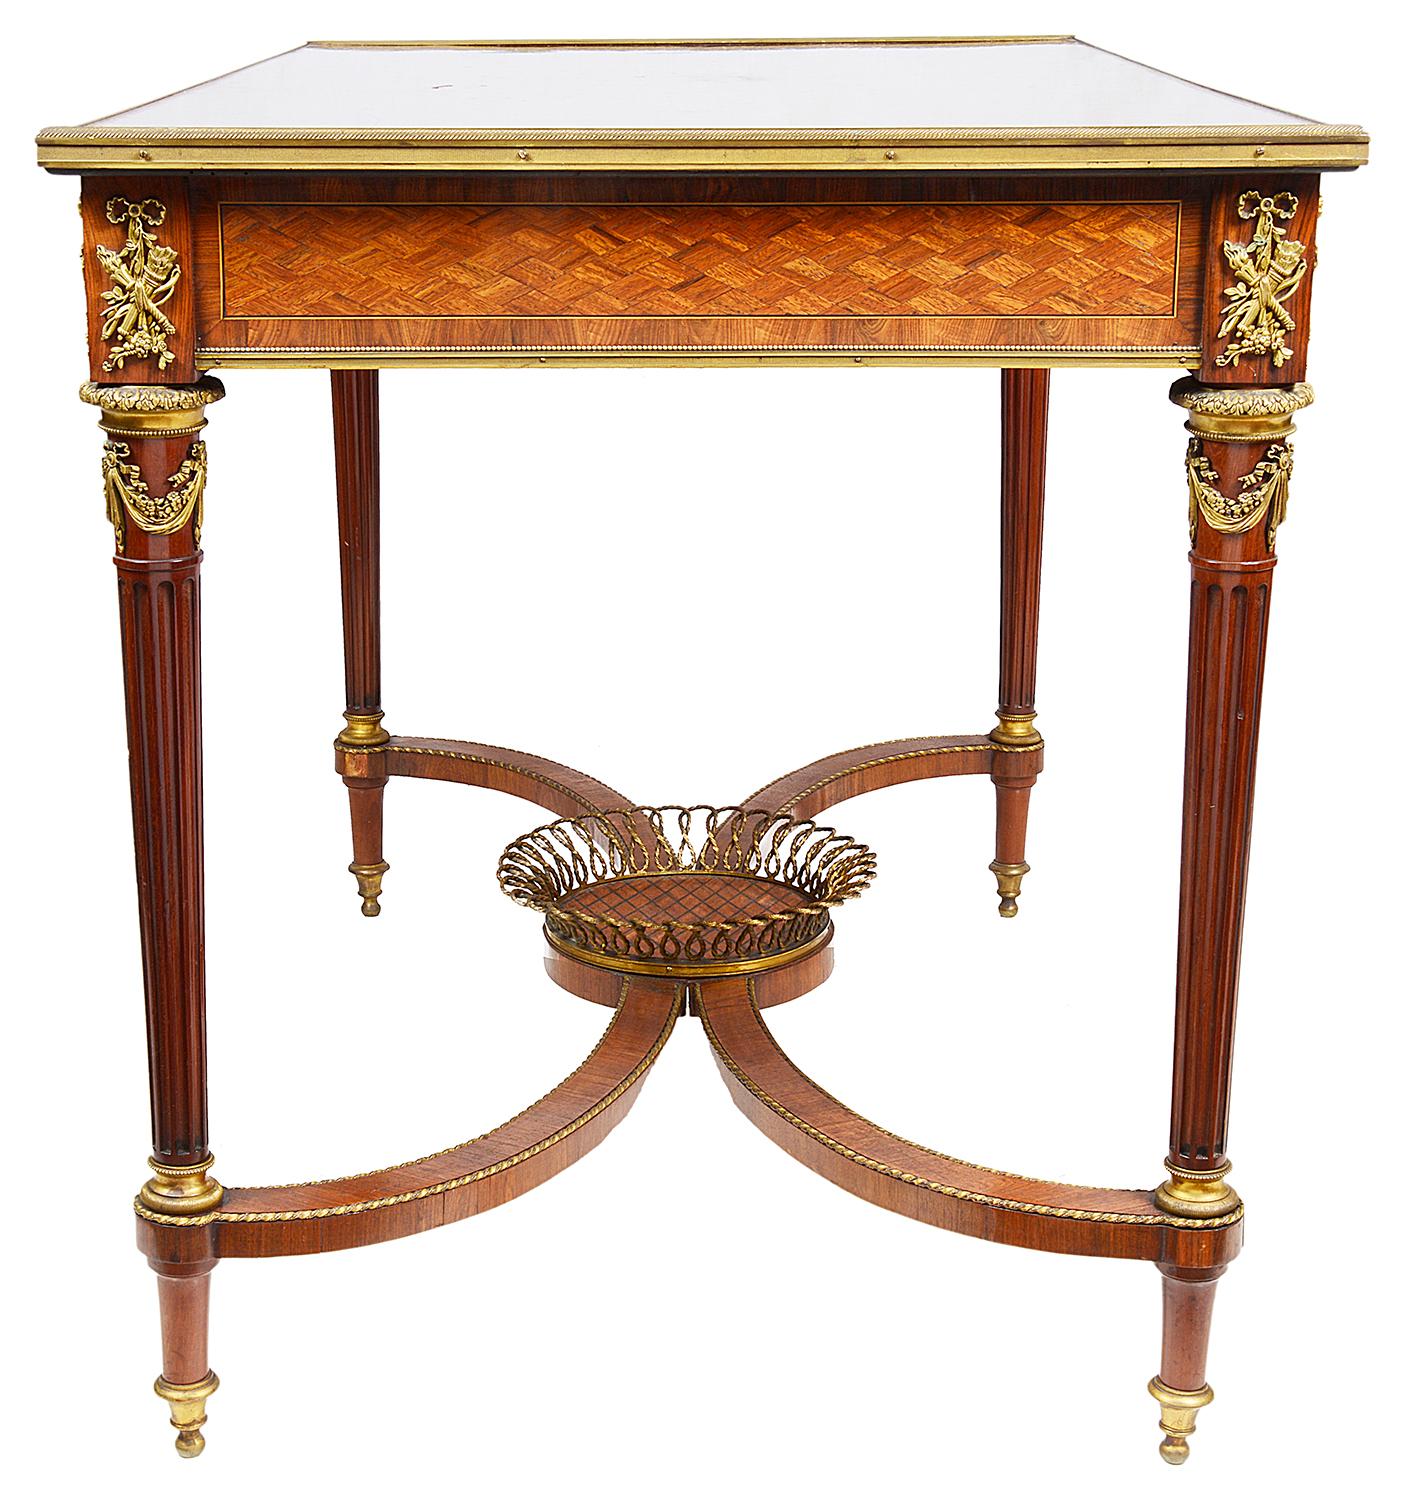 A very good quality French late 19th century inlaid centre table, the top having geometric parquetry inlay to the top and frieze, gilded ormolu mask and floral mounts, a single frieze drawer, stamped 'Shoolbred & Co' retailers. Further classical